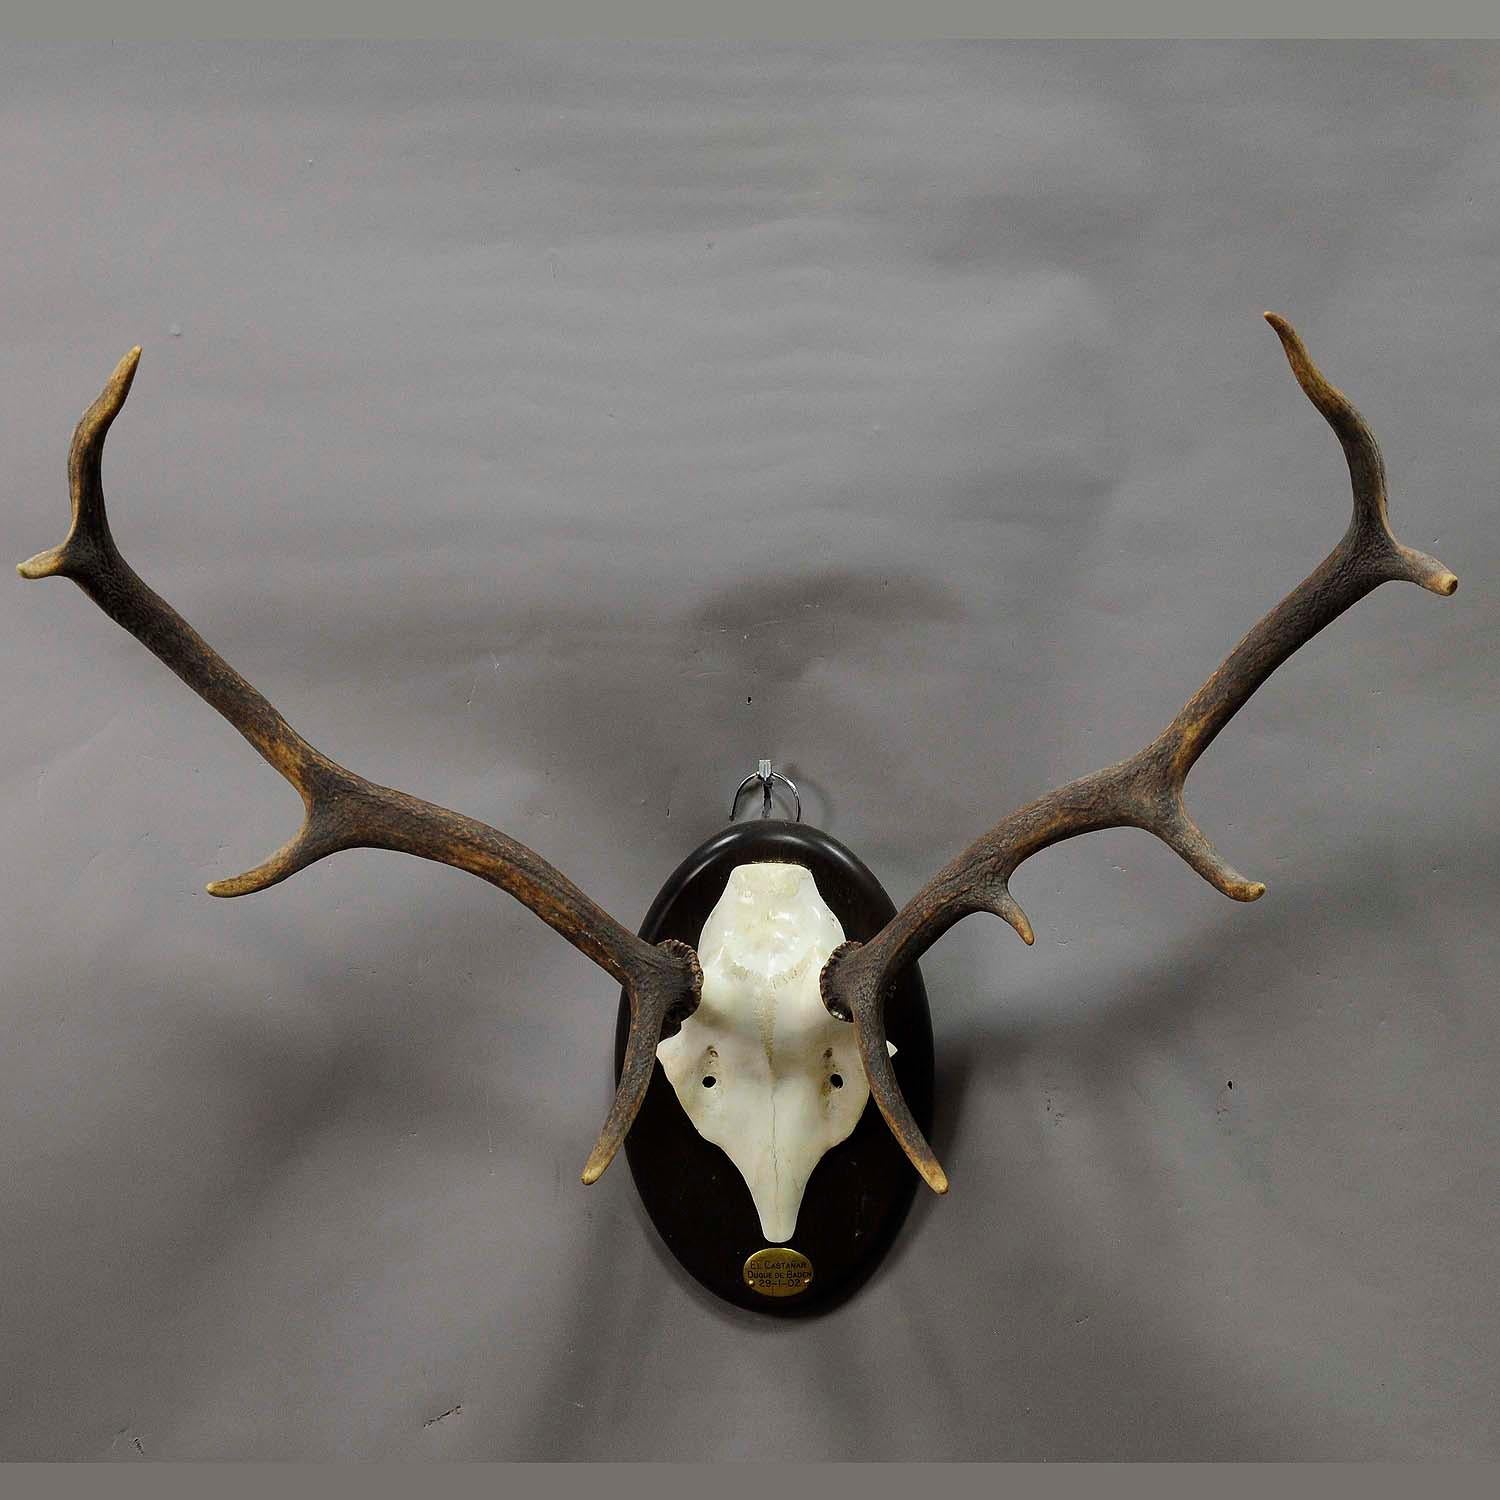 A great uneven 10 pointer black forest deer trophy from the palace of salem in south germany. Shoot by a member of the lordly family of Badenin 2002. with metal emblem on the plaque: El Castanar 2002. Mounted on a wooden plaque, good